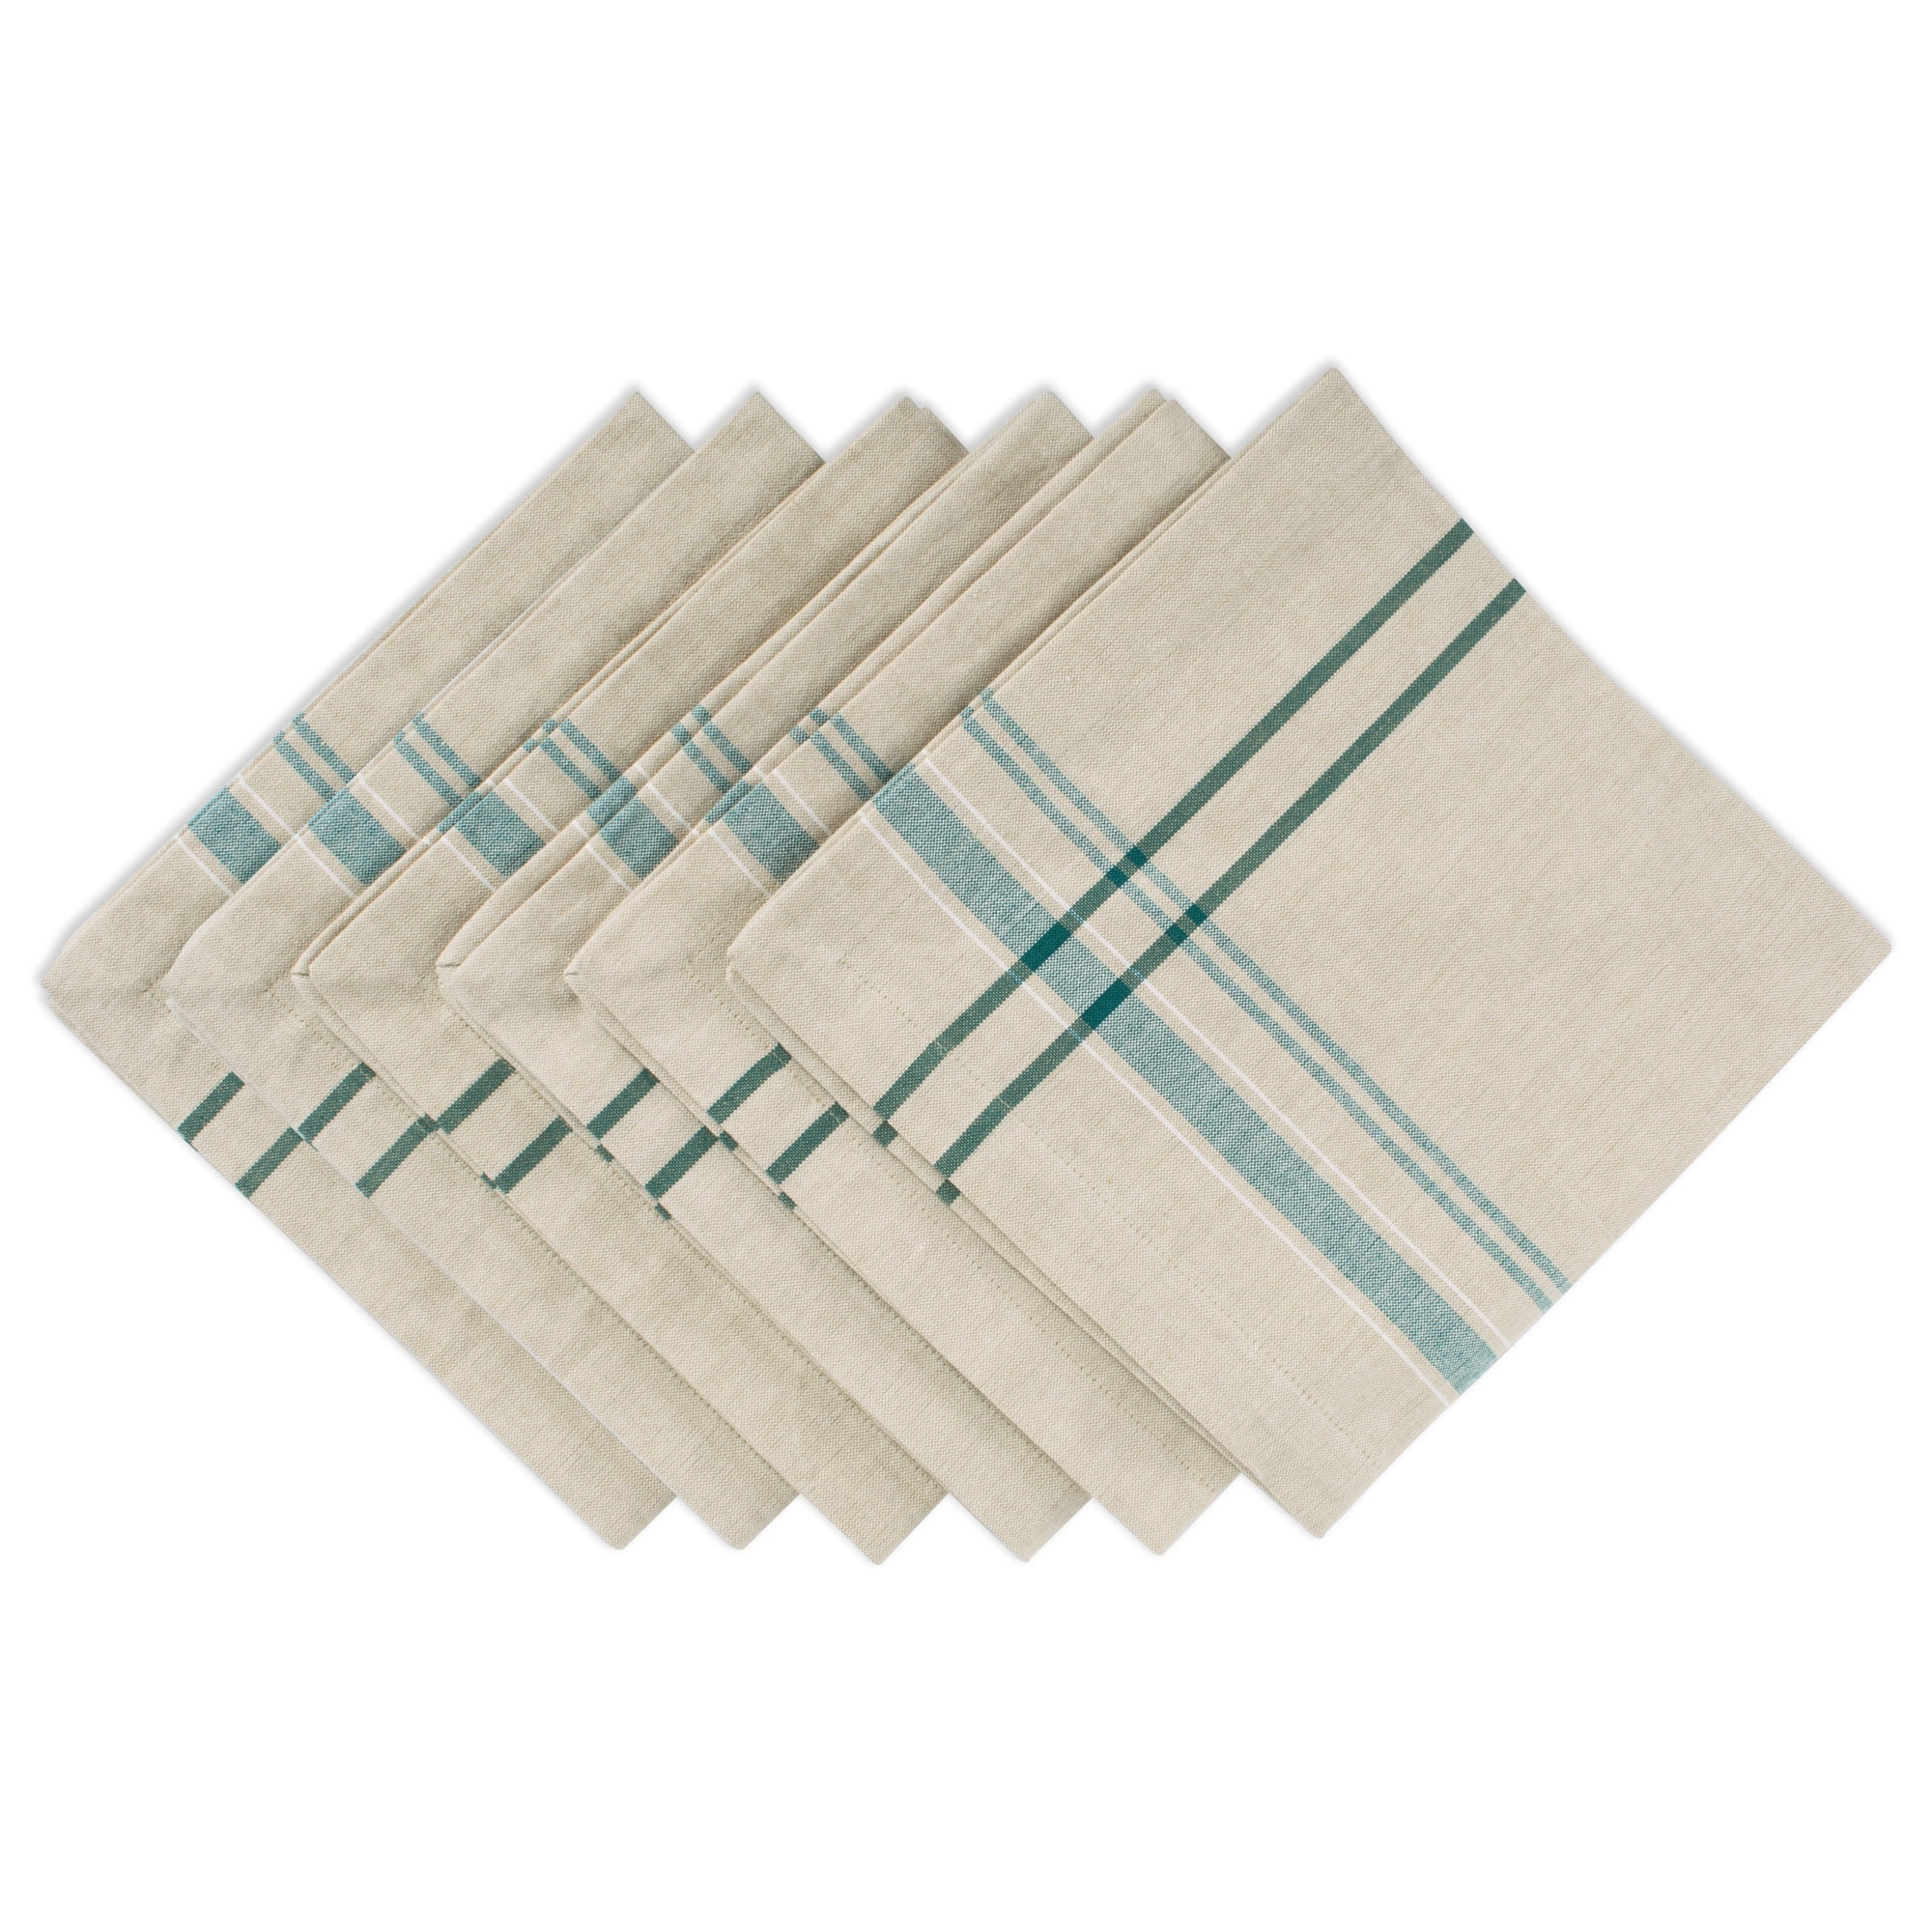 Pack of 6 Taupe Fall, DII Oversized 20x20" Cotton Napkin Perfect for Spring 